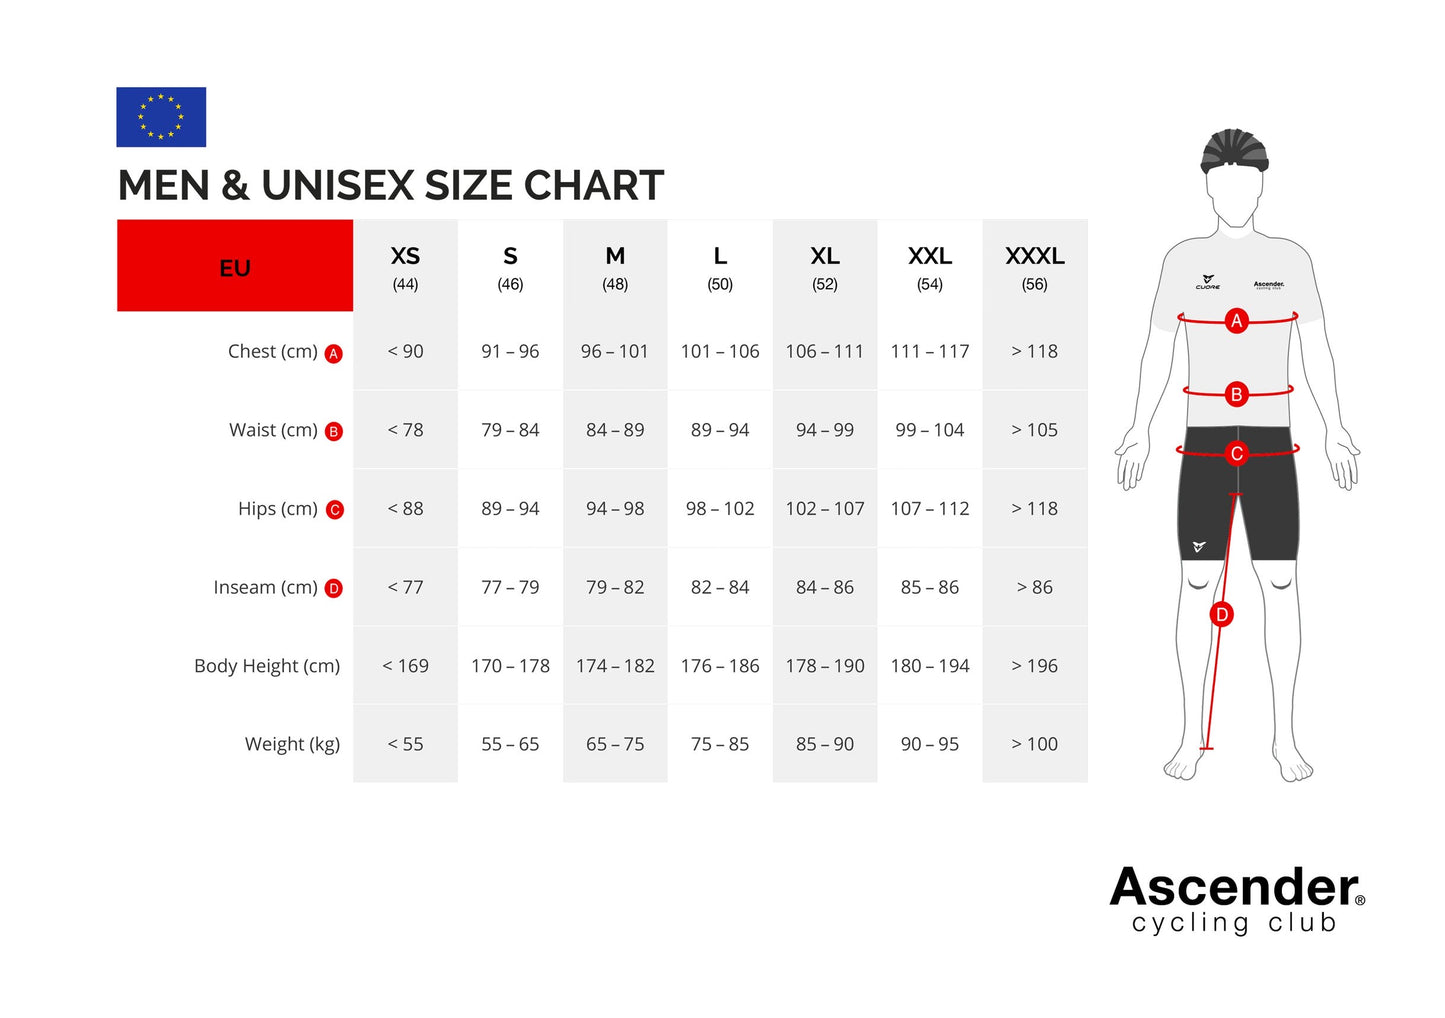 Mountain Edition Blue Bib Short from Ascender Cycling Club Zürich and Cuore of Switzerland European Size Chart